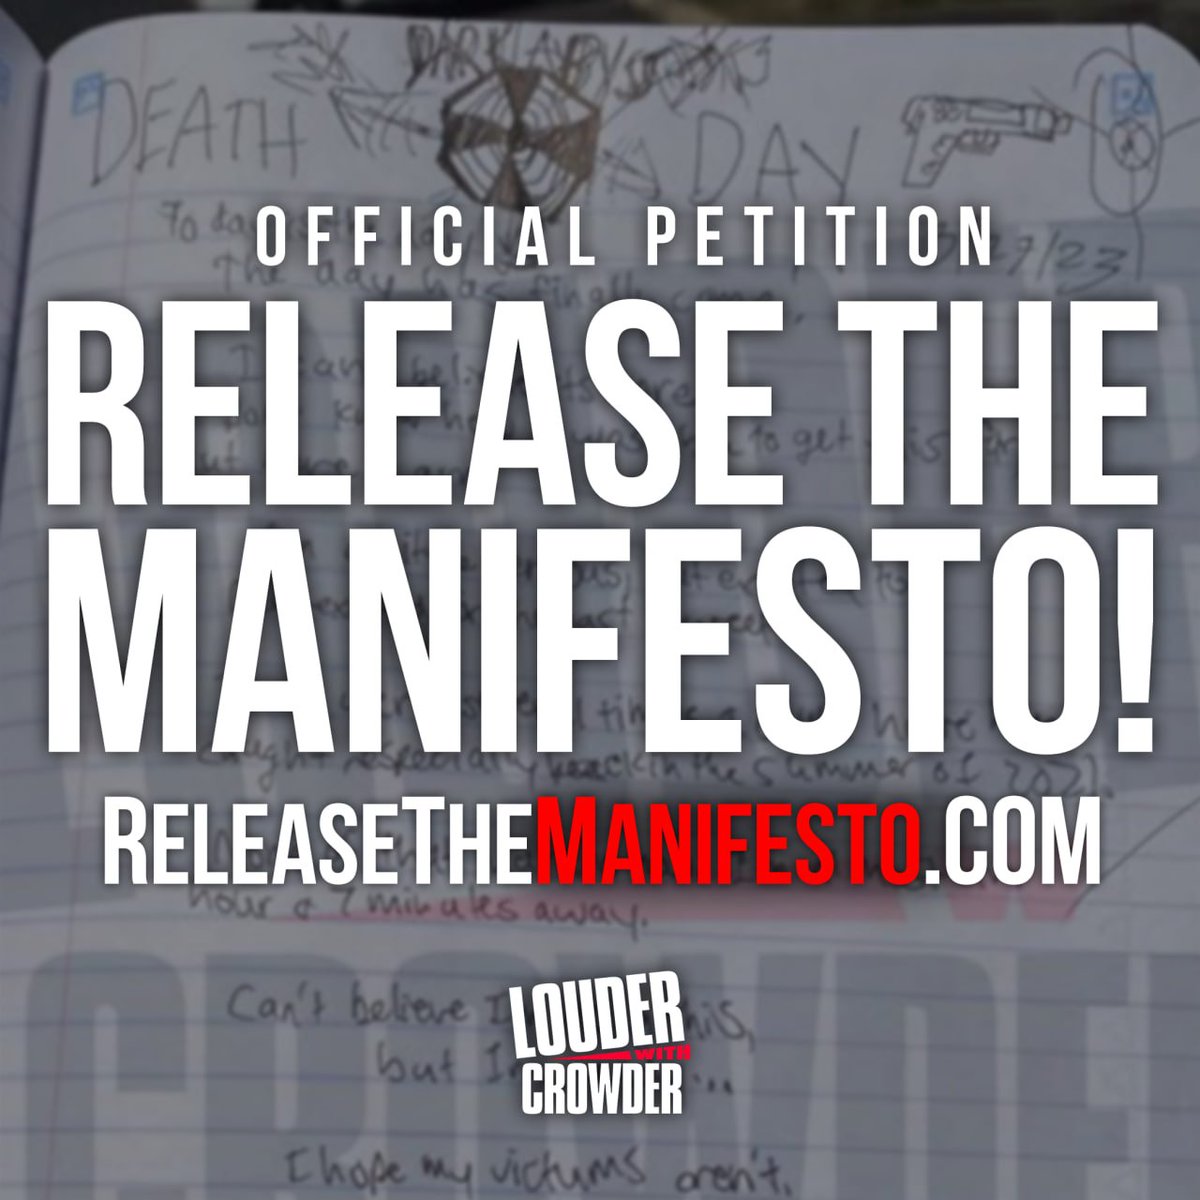 🚨 ATTENTION 🚨

We are at the home stretch until 2024 and we need your help!

We are still collecting signatures to demand a release of the FULL #NashvilleManifesto

DEMAND TRANSPARENCY!

Sign now:
ReleaseTheManifesto.com